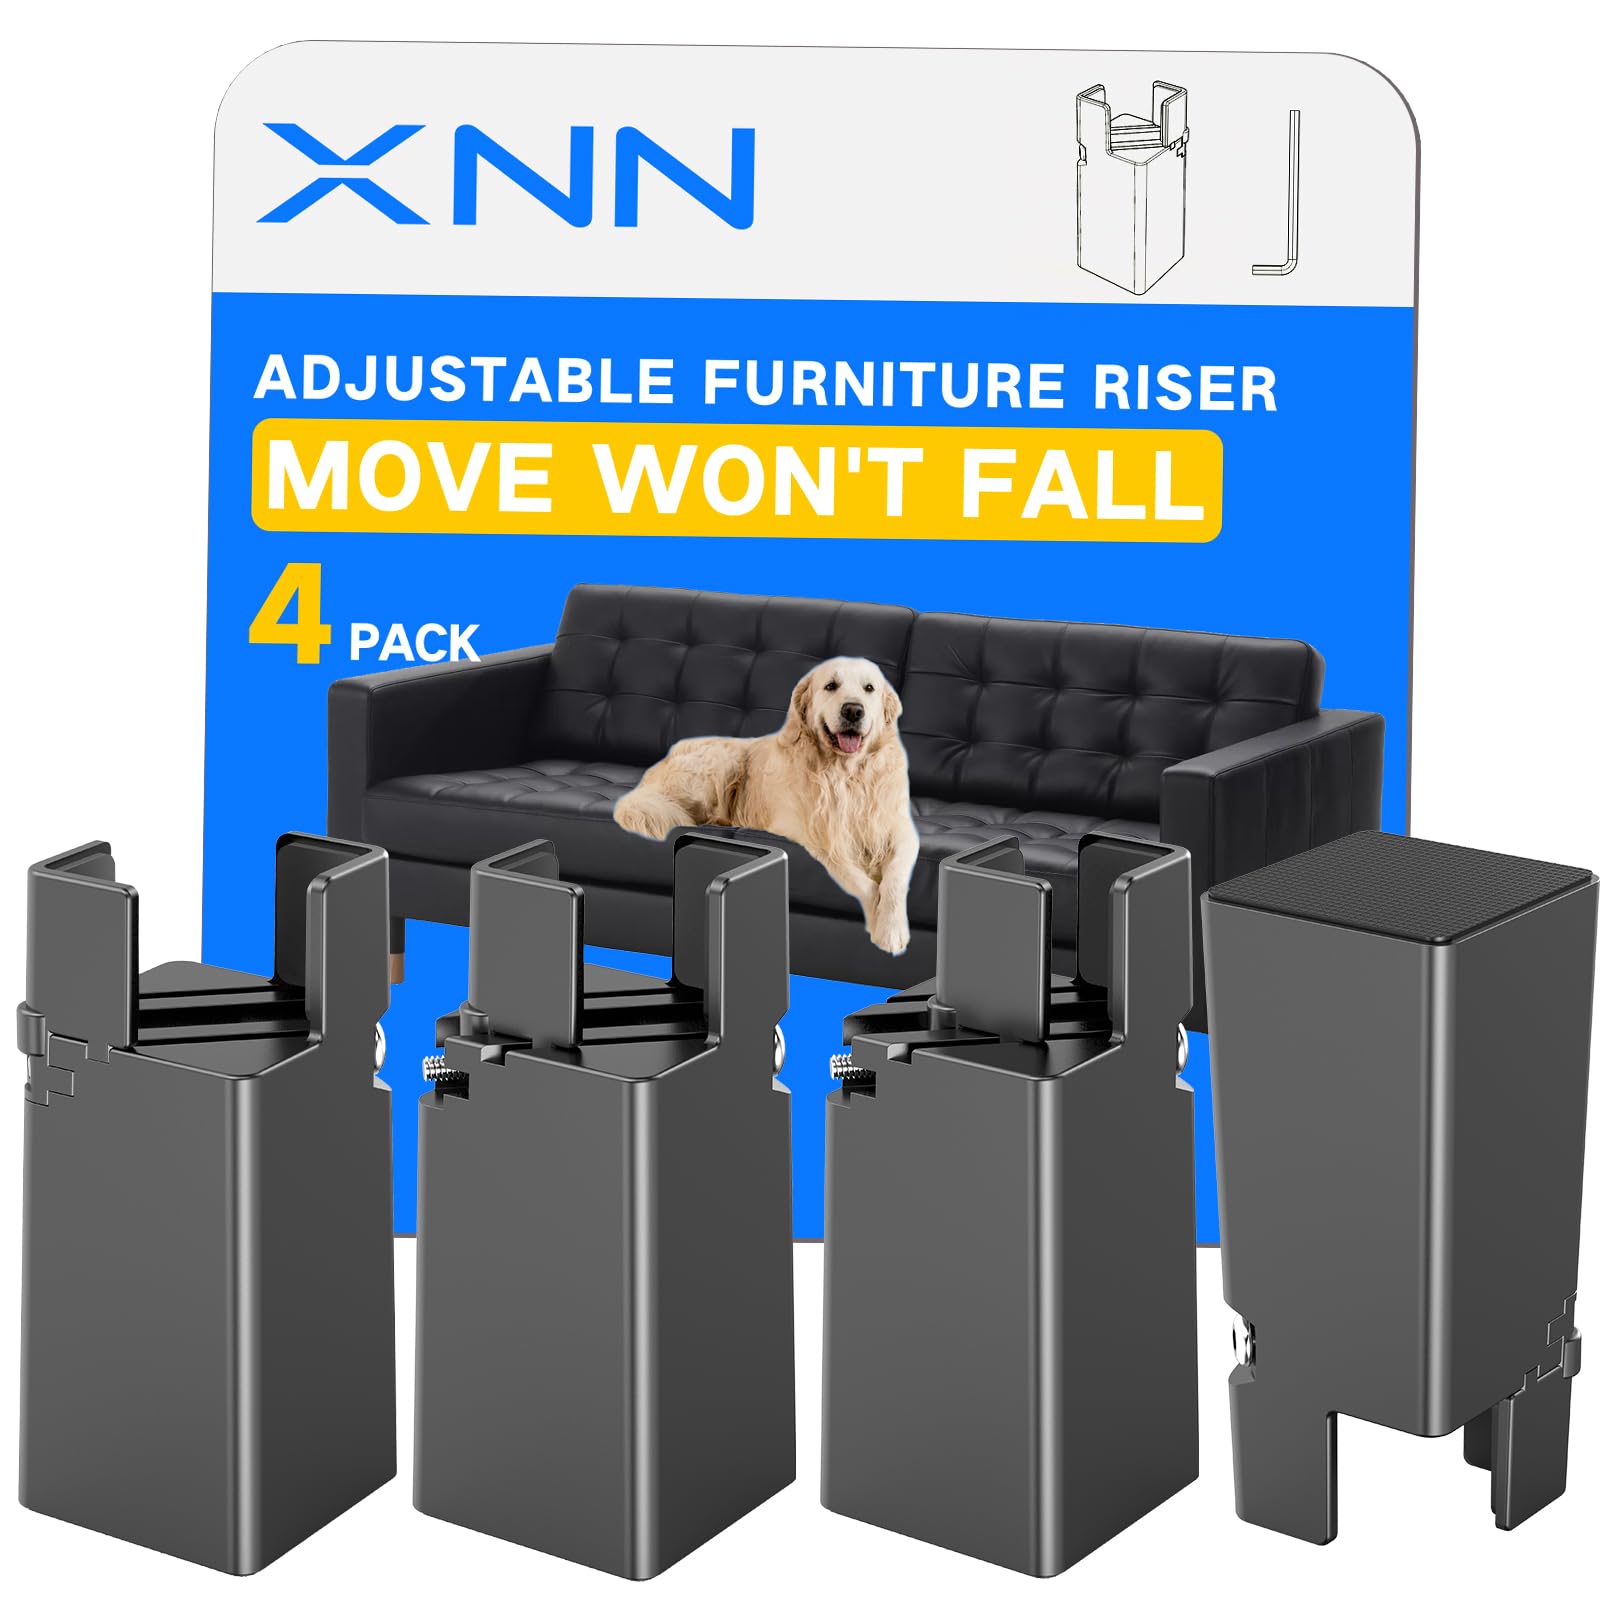 Amazon.com: XNN Furniture Risers Adjustable Bed Risers 4 Inch with ...